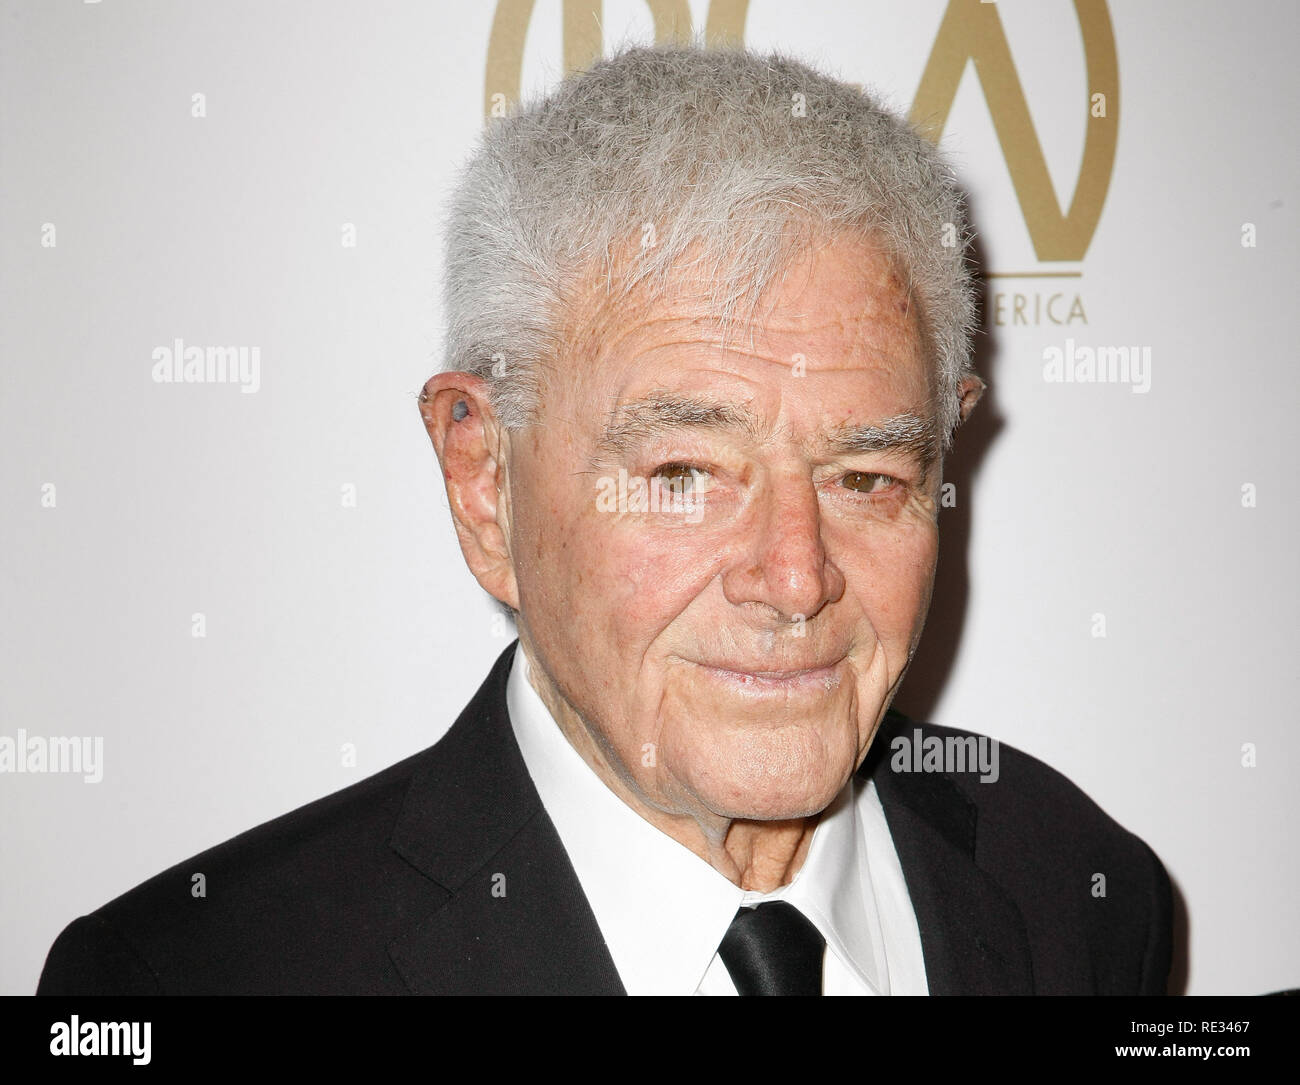 California, USA. 19th Jan 2019. Richard Donner attends the 30th annual Producers Guild Awards at The Beverly Hilton Hotel on January 19, 2019 in Beverly Hills, California. Photo: imageSPACE/MediaPunch Credit: MediaPunch Inc/Alamy Live News Stock Photo